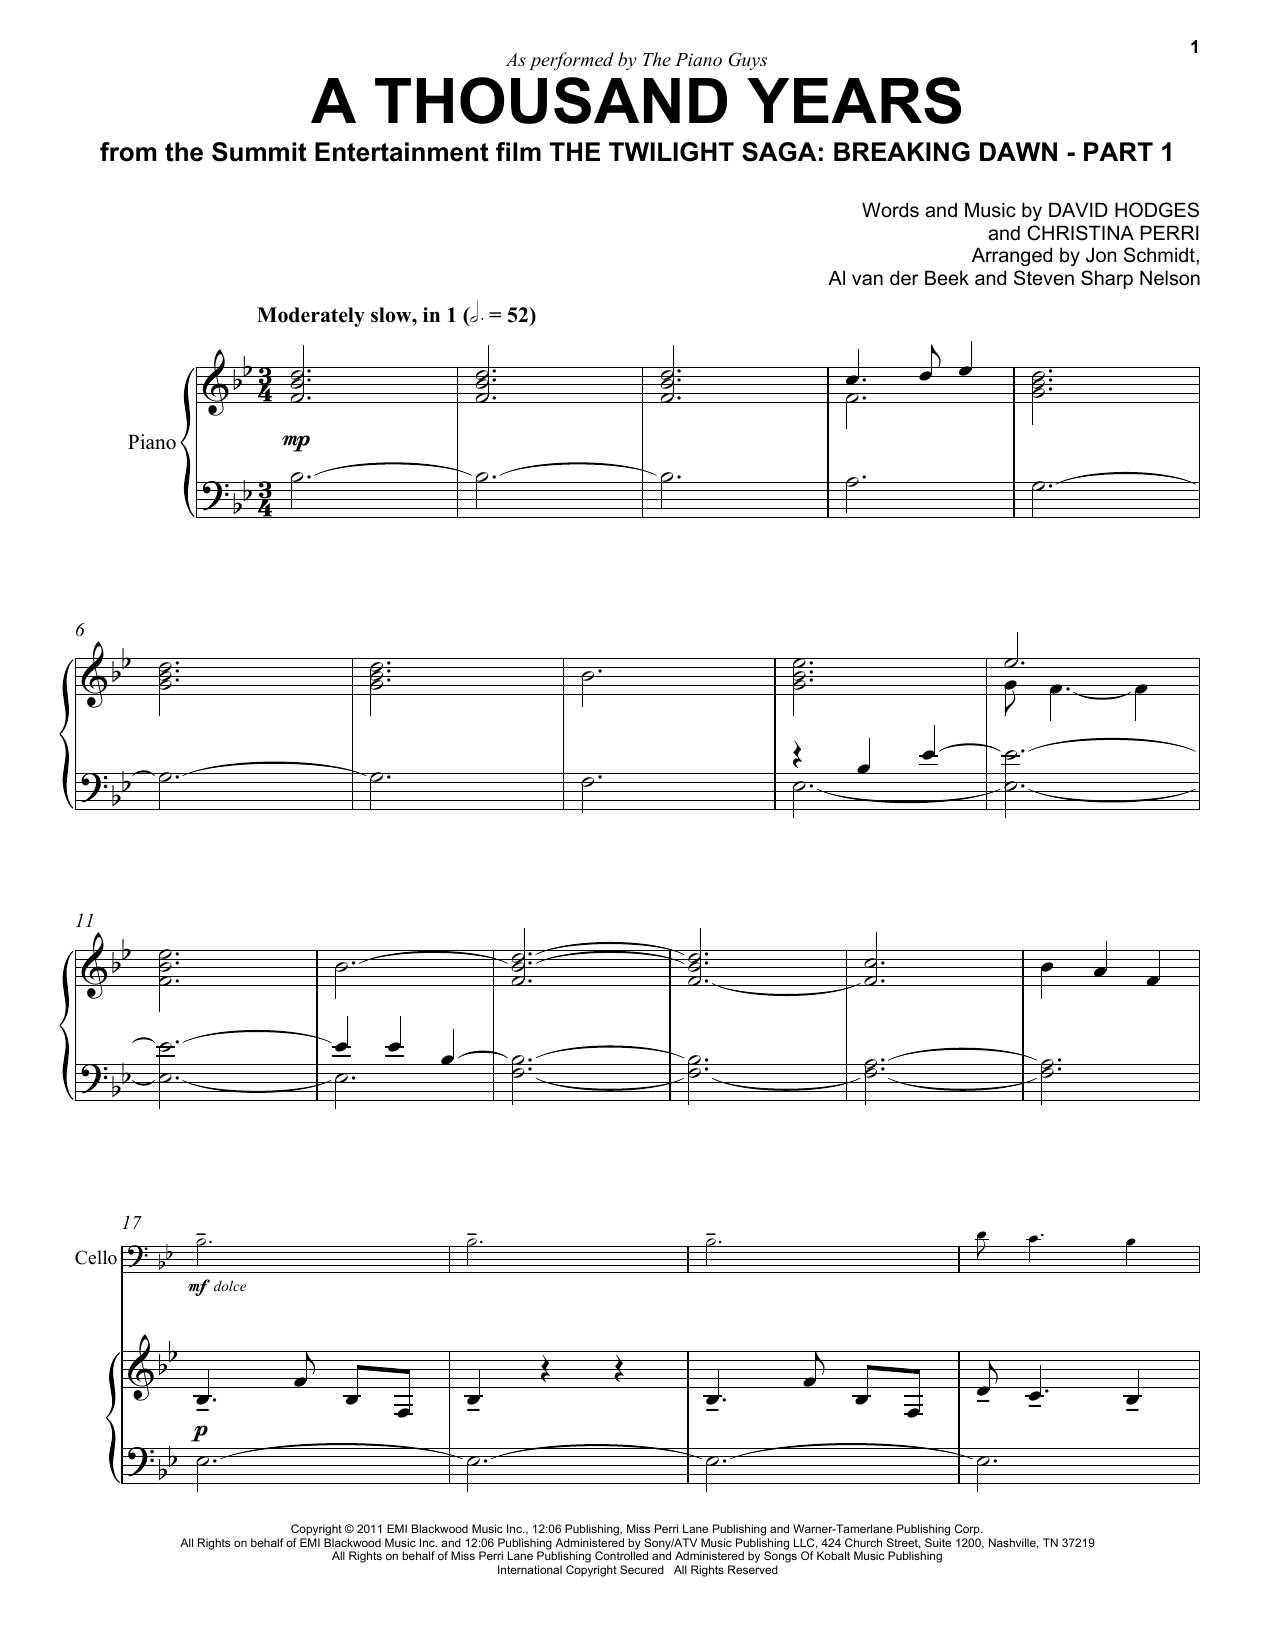 The Piano Guys A Thousand Years sheet music notes and chords. Download Printable PDF.